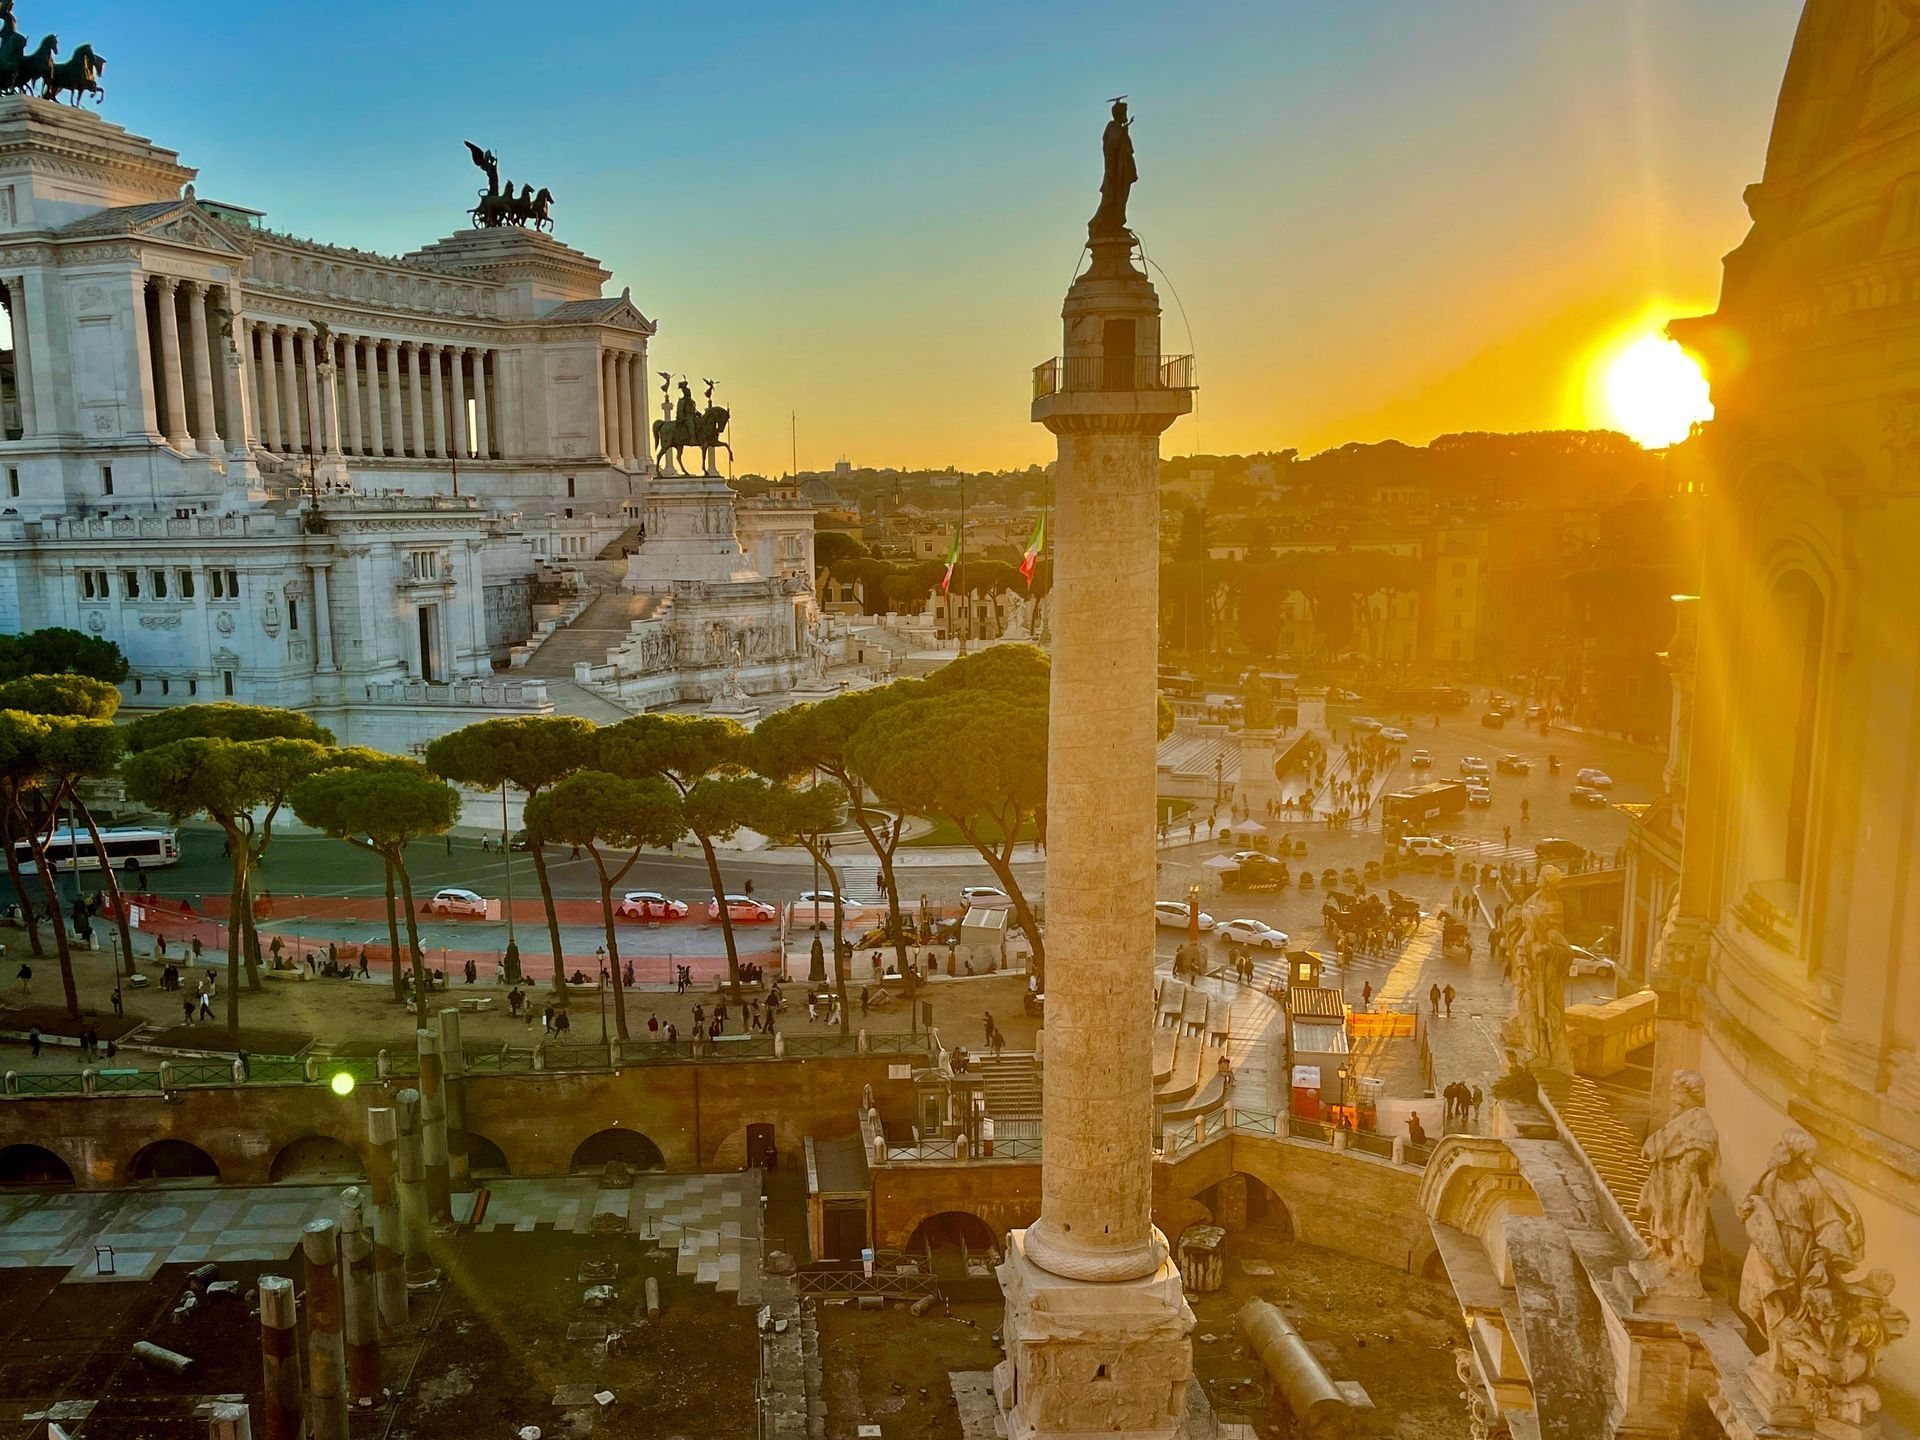 Guided Tours of Rome | Walking Tour of Rome at Sunset Private Tour Guide and Driver to Discover Rome